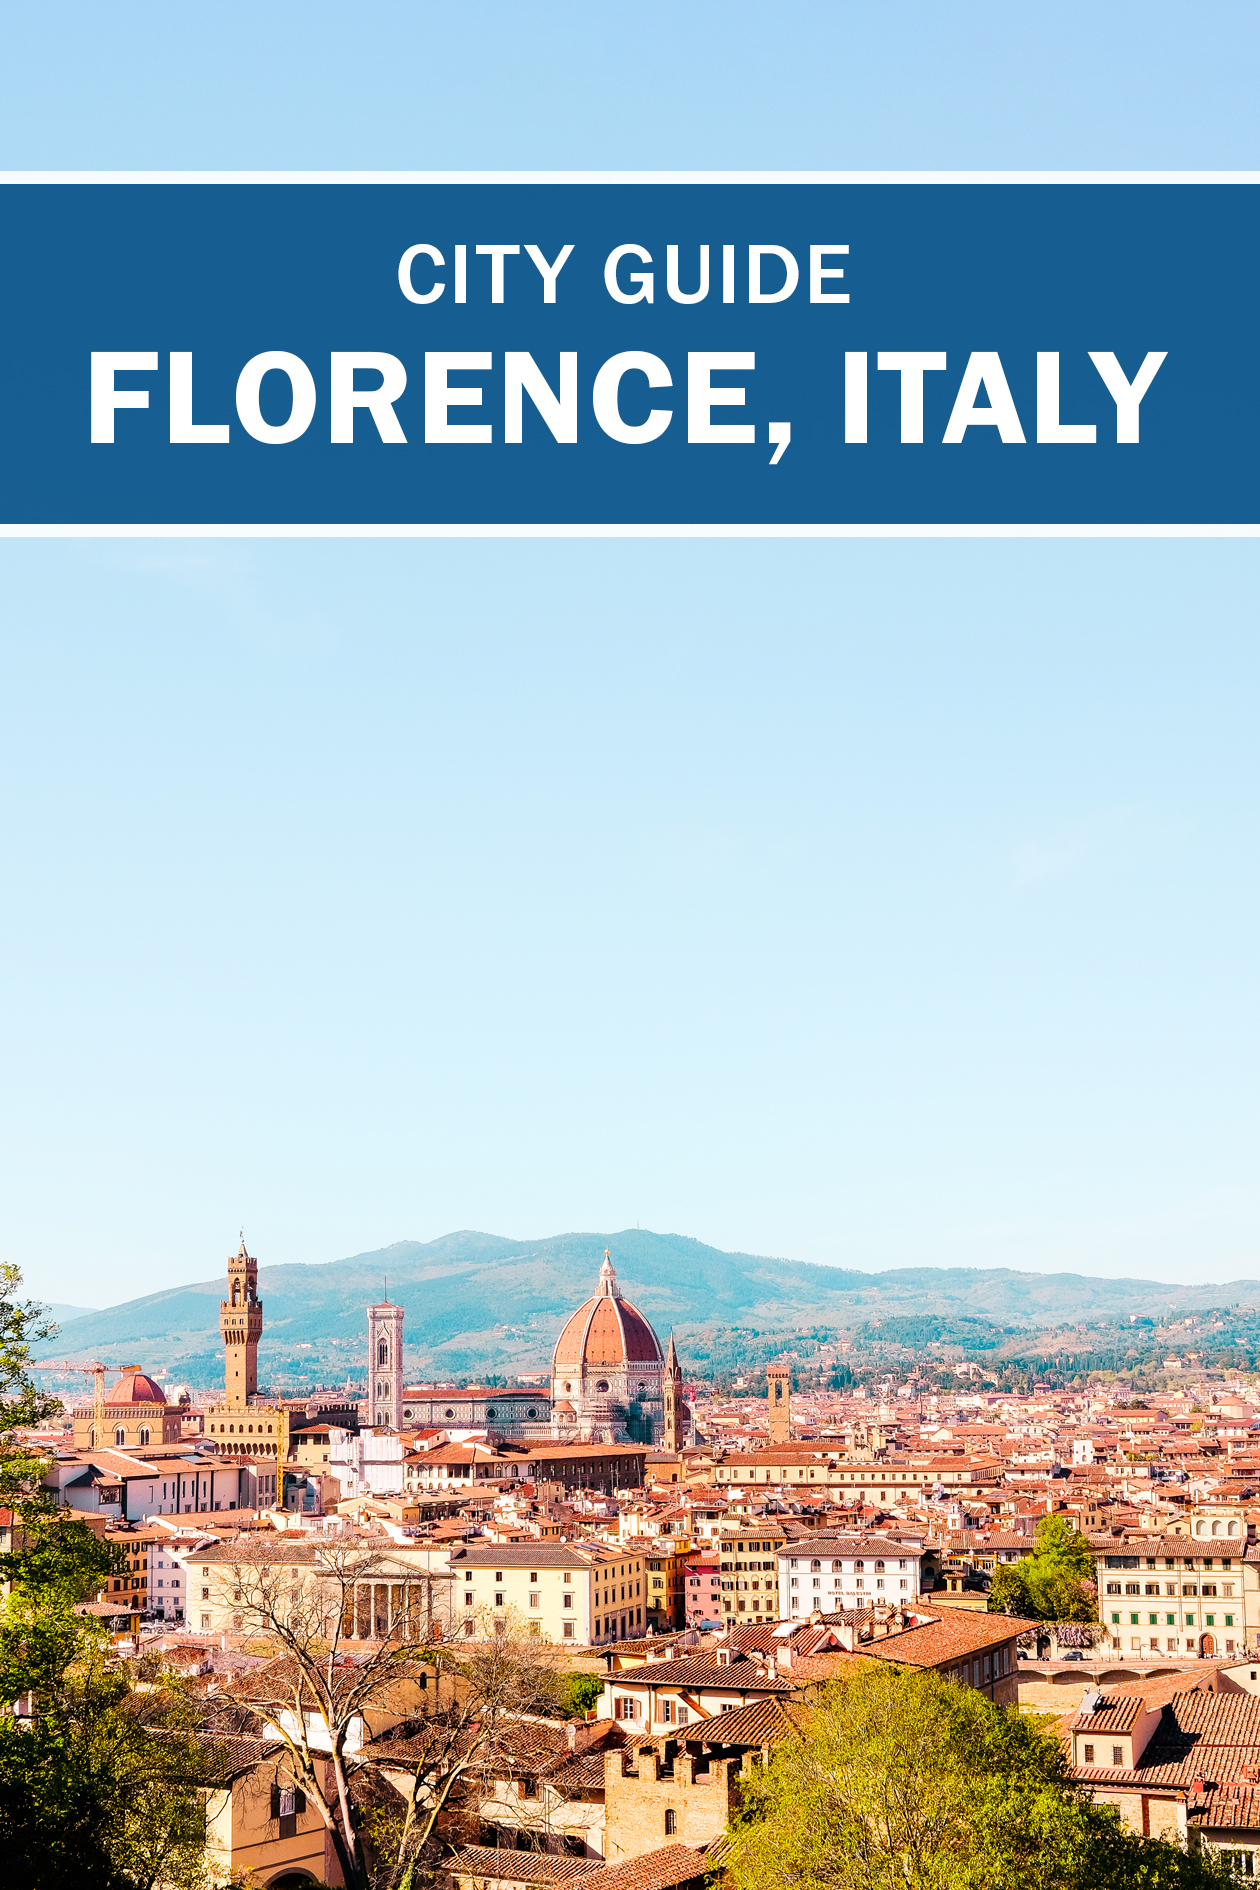 We went to Italy for our honeymoon and here's how we spent 5 days in Florence. If you want a travel guide to Florence, Italy (including where to shop, what to eat, and what to do) here's everything we did in Florence!